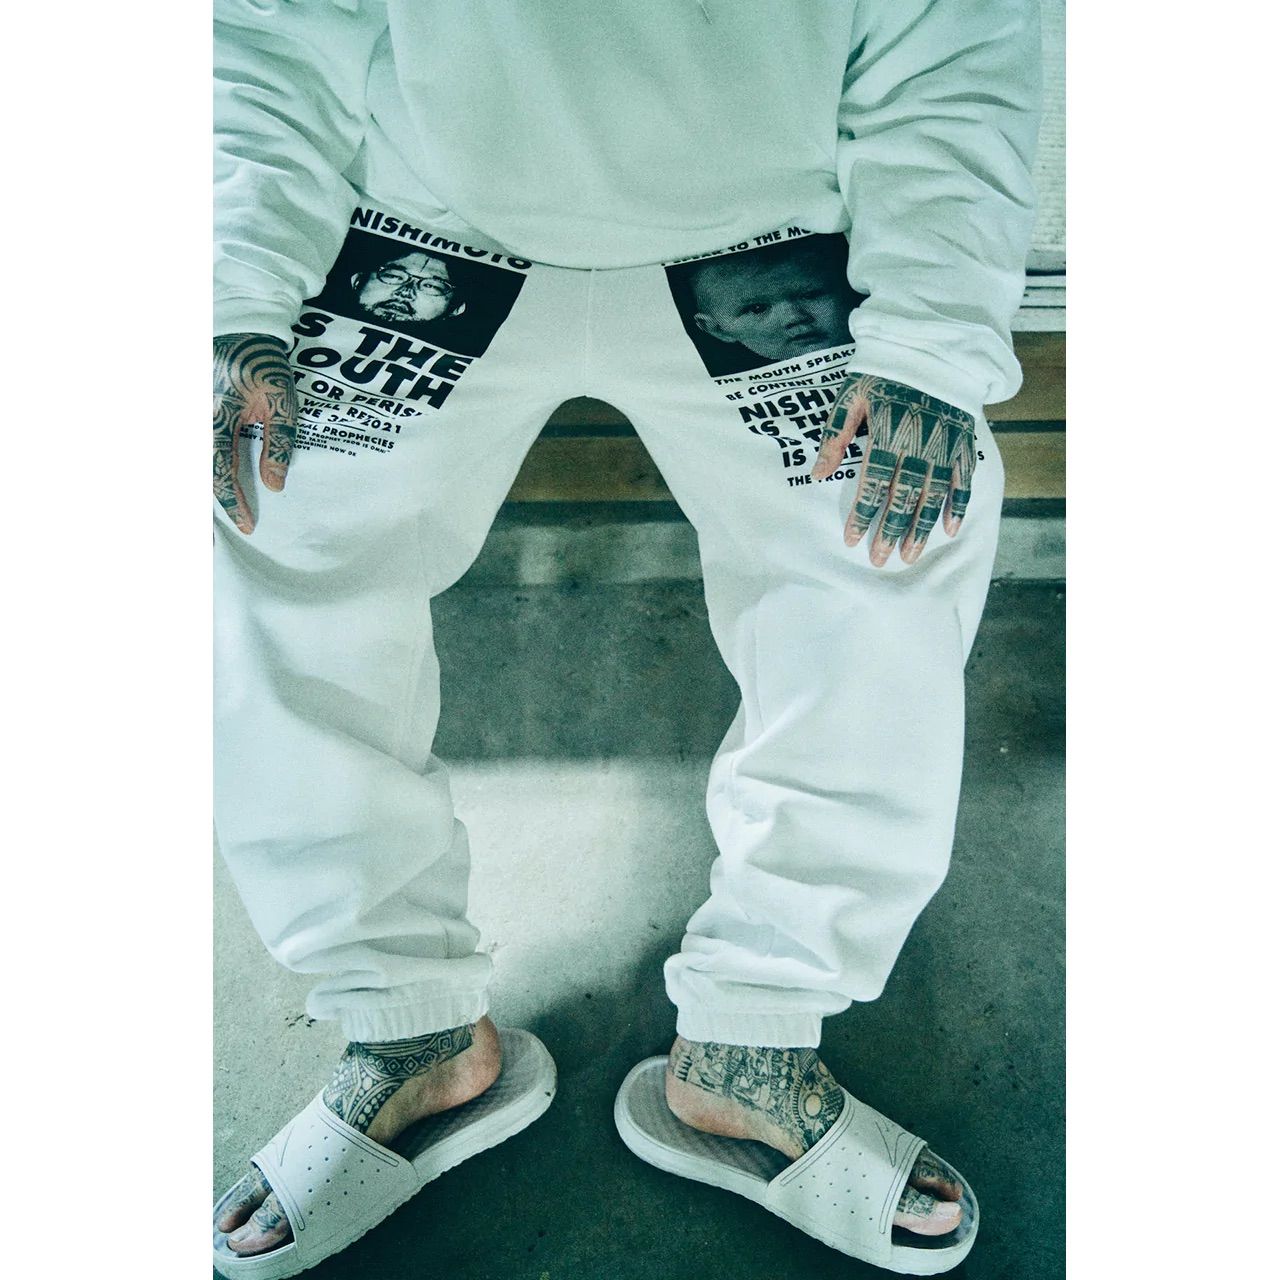 NISHIMOTO IS THE MOUTH - 【残りわずか】Classic Sweat Pants 